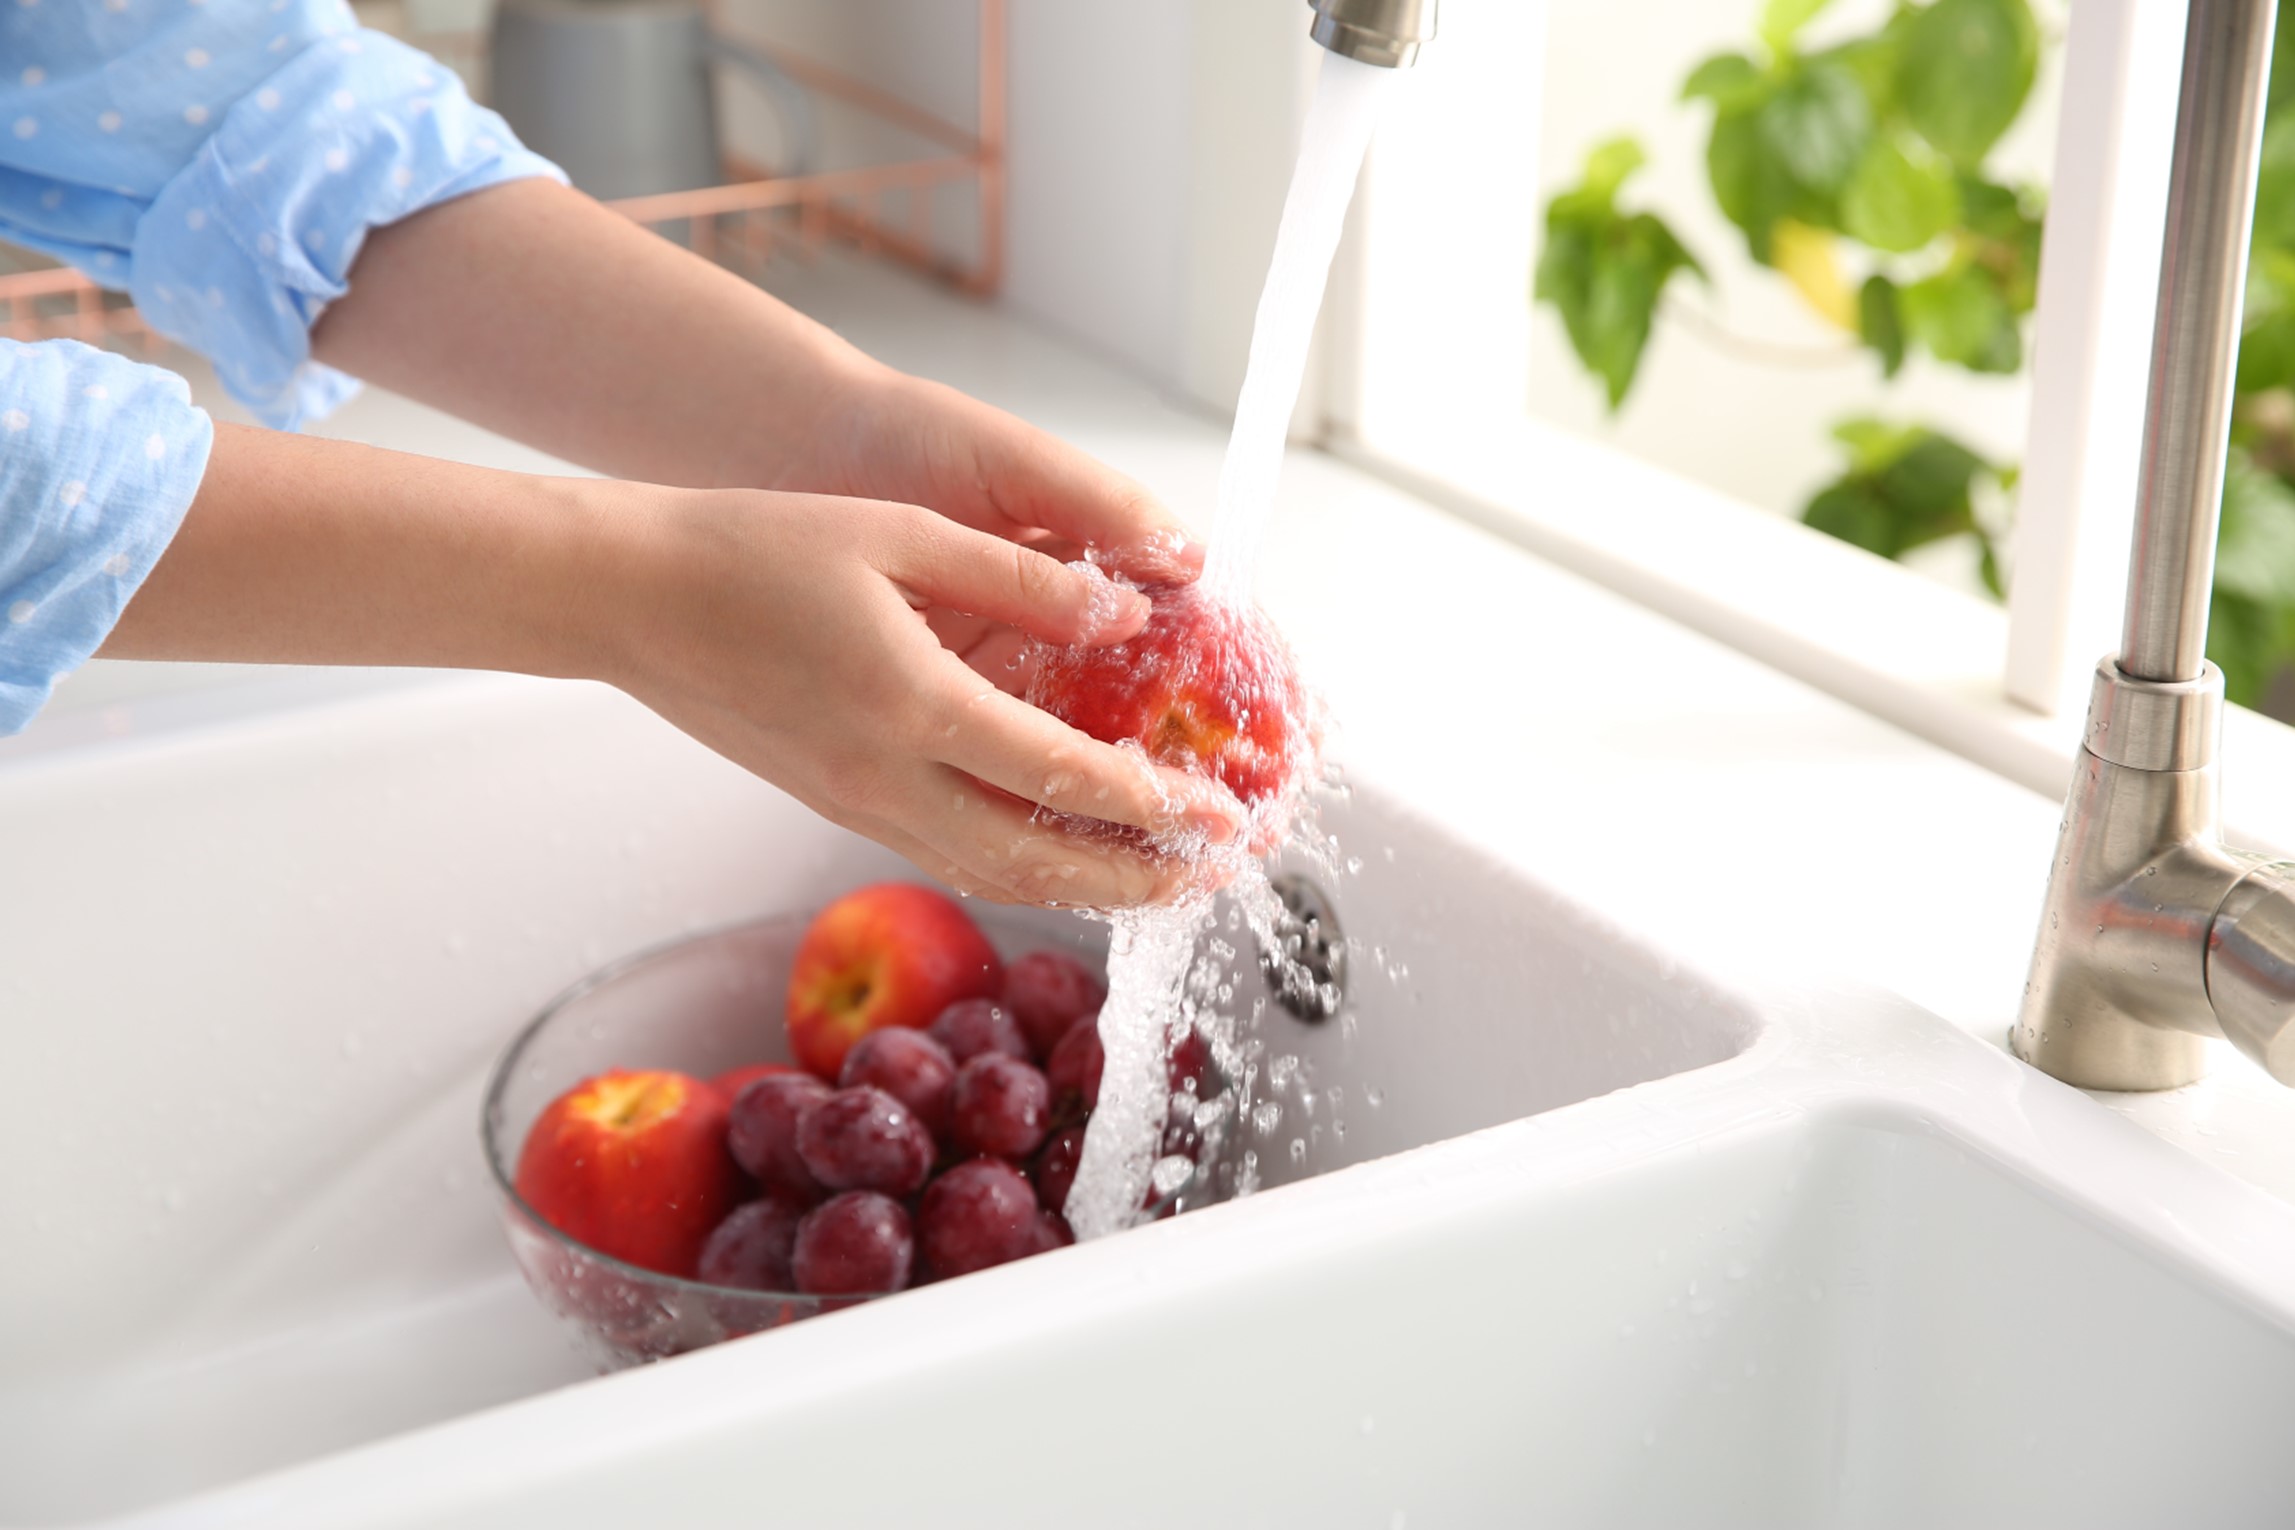 Do we really have to wash fruit and vegetables?